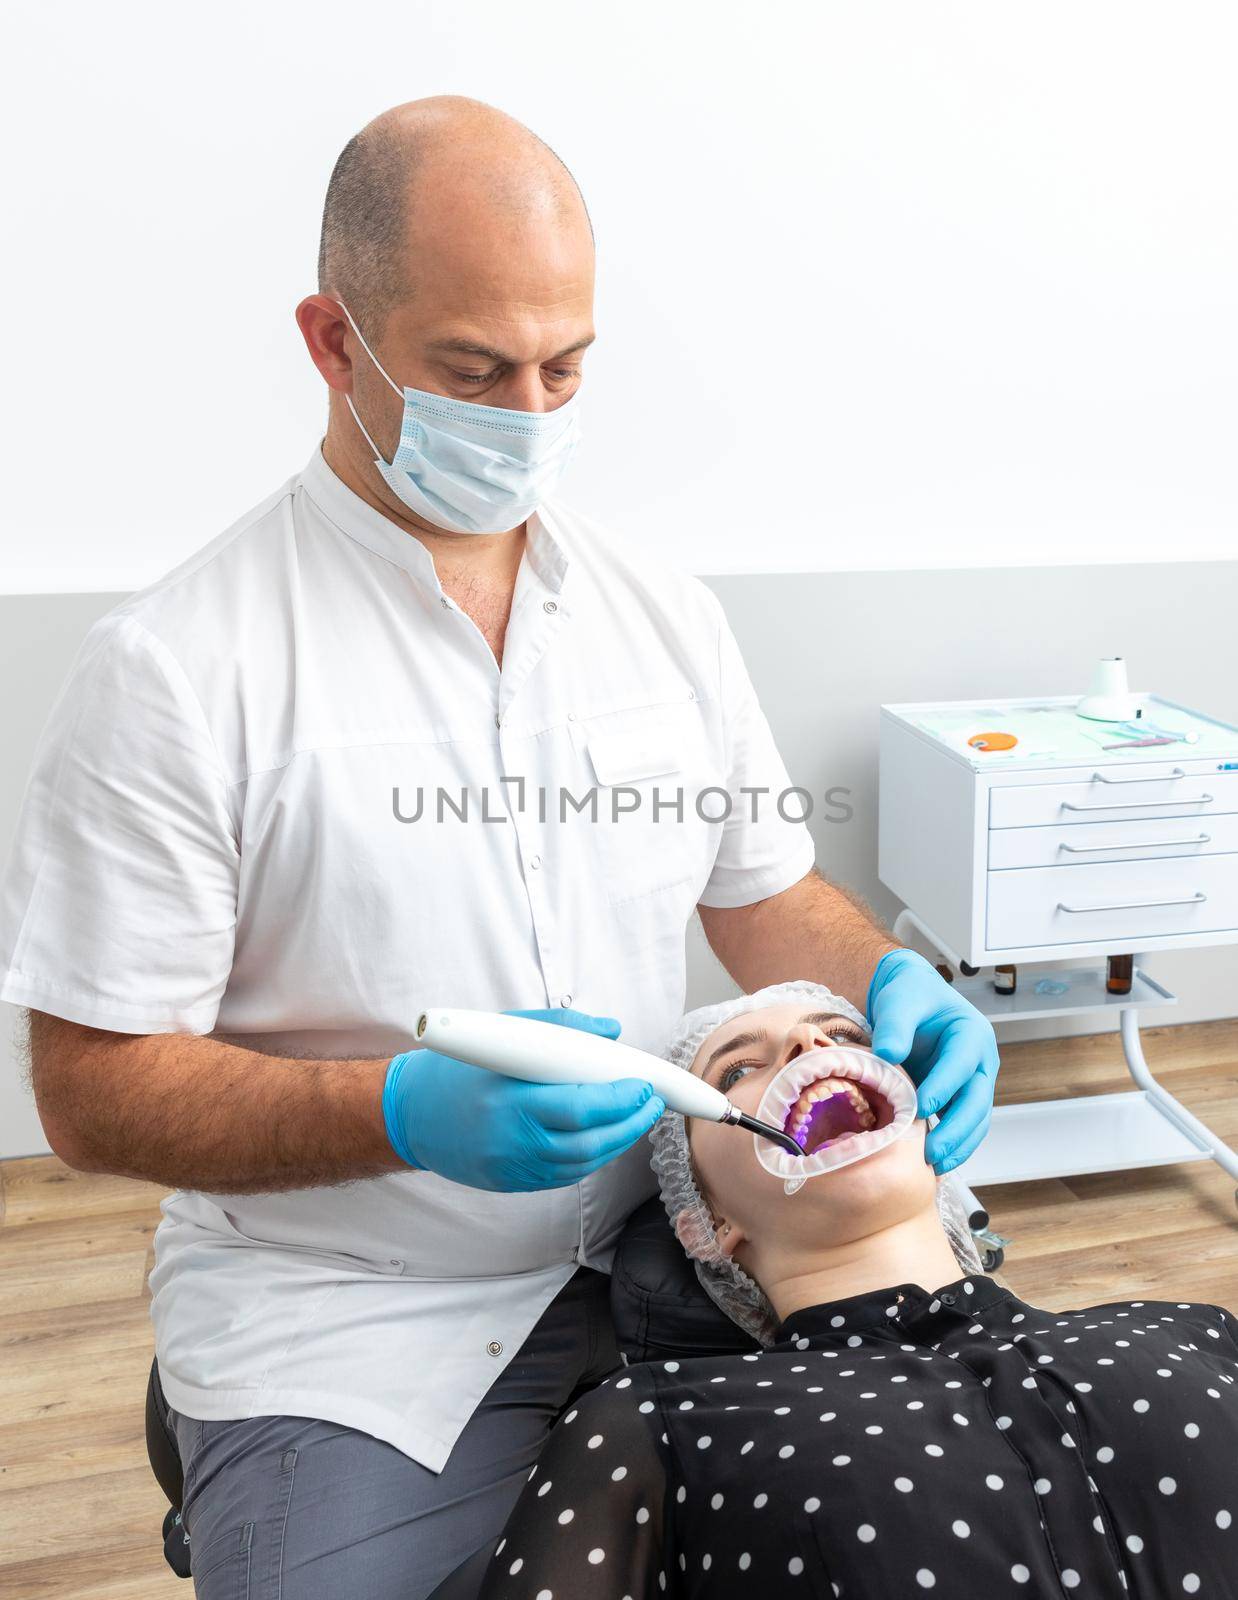 Closeup view of dentist using dental curing UV lamp on teeth of a patient